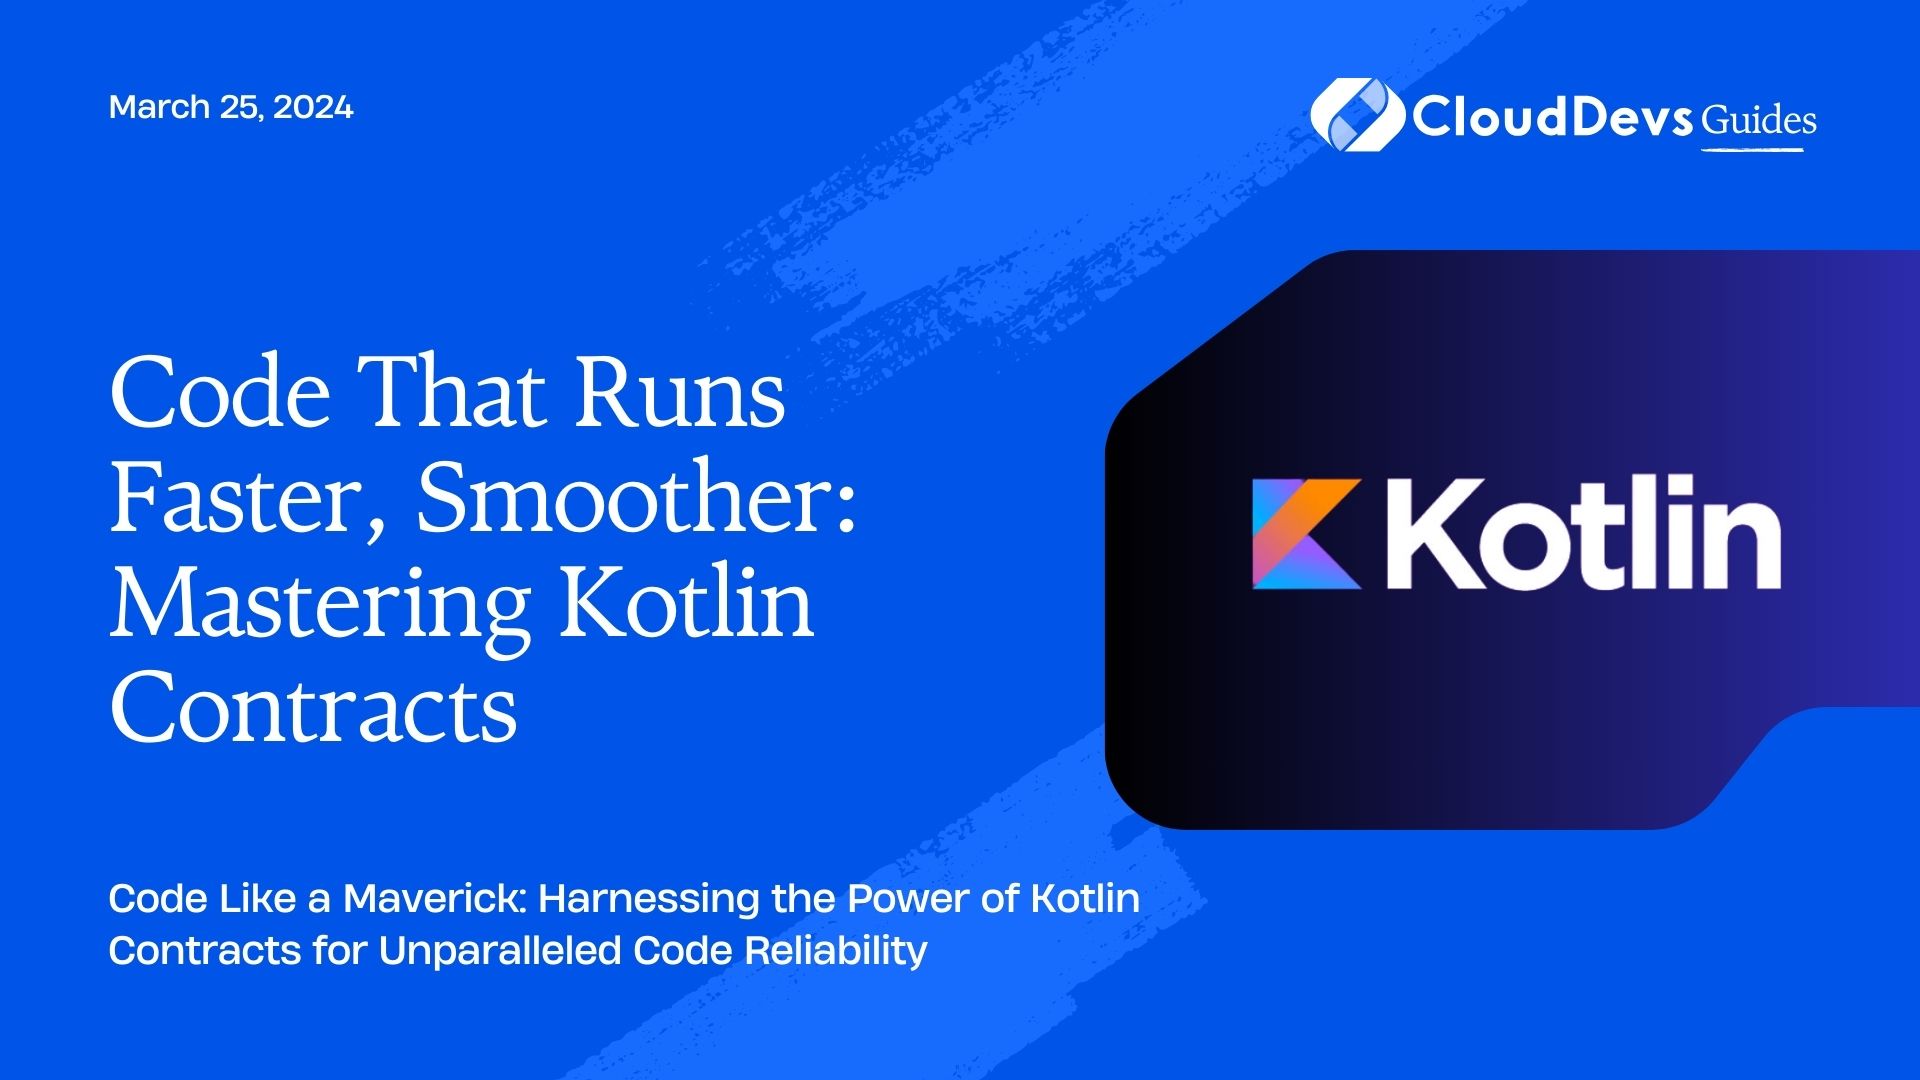 Code That Runs Faster, Smoother: Mastering Kotlin Contracts